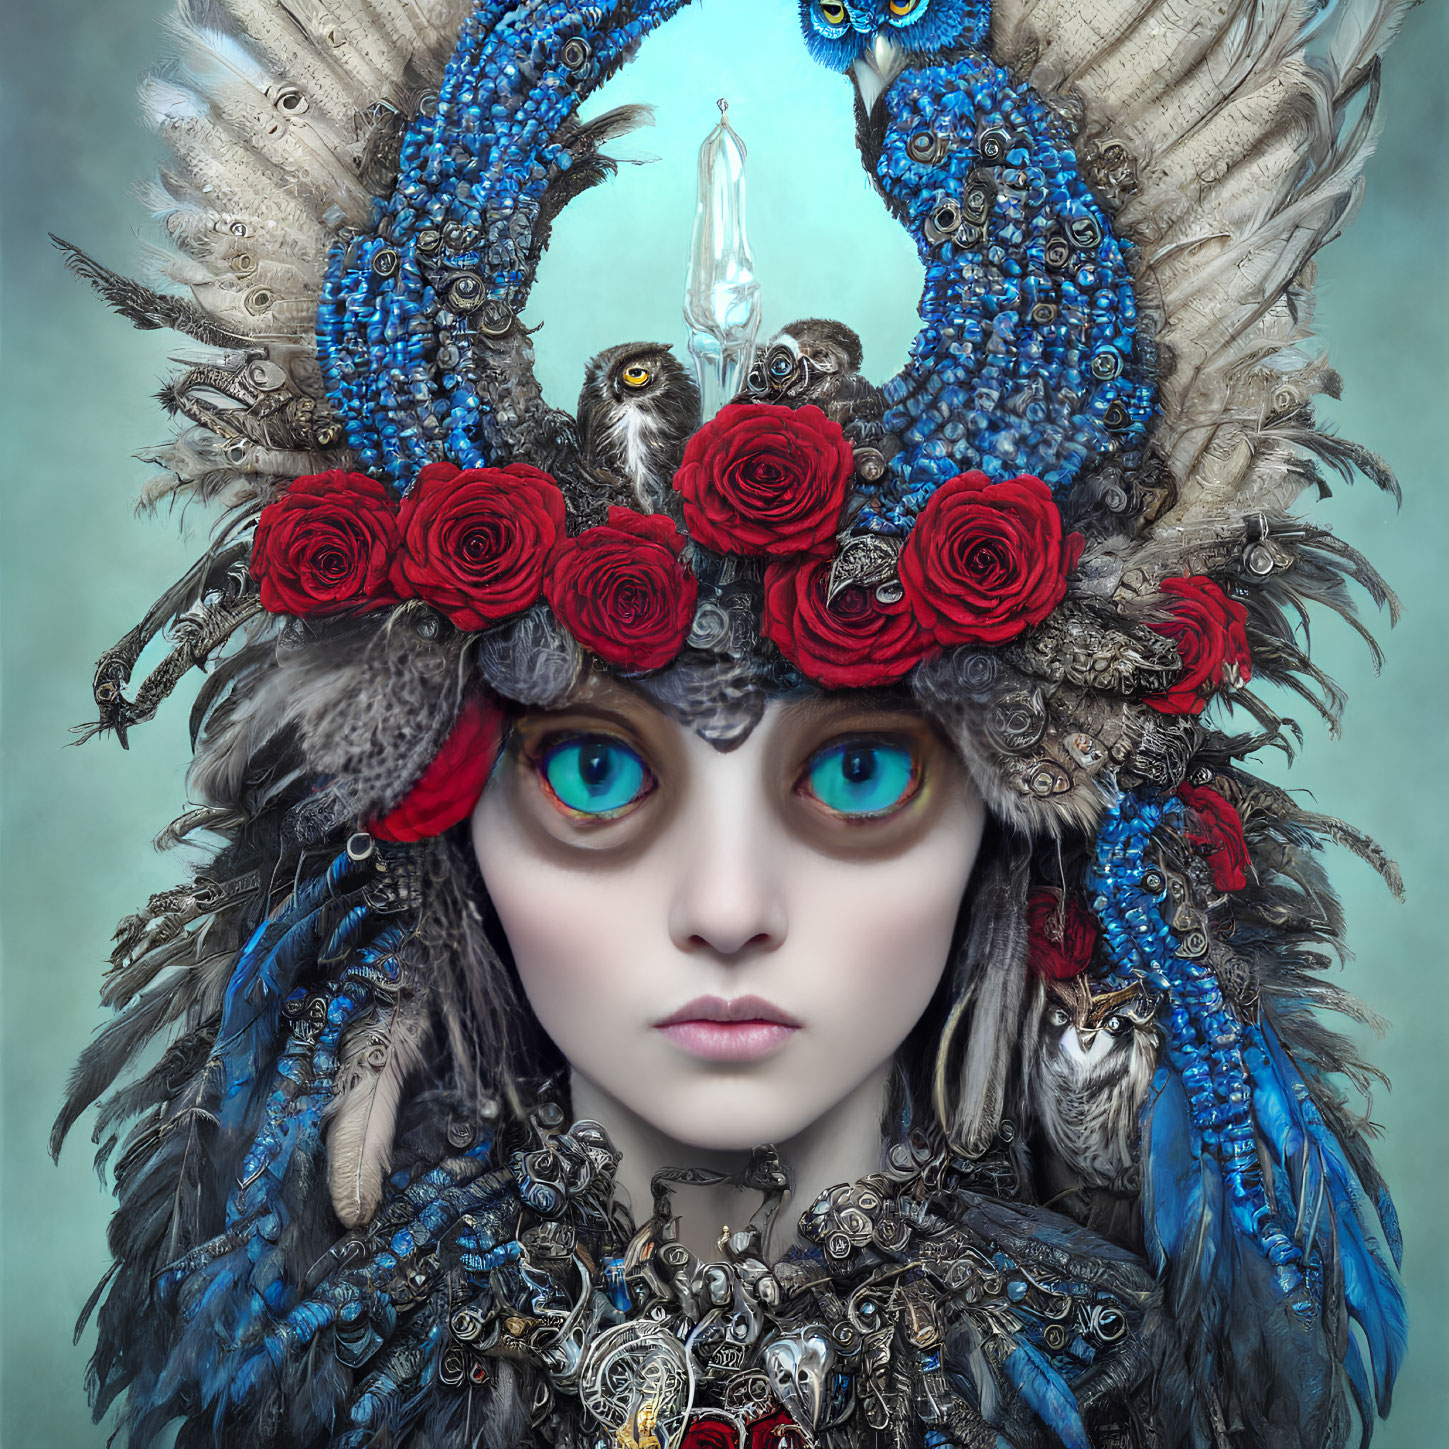 Portrait of person with blue eyes in elaborate peacock feather headdress